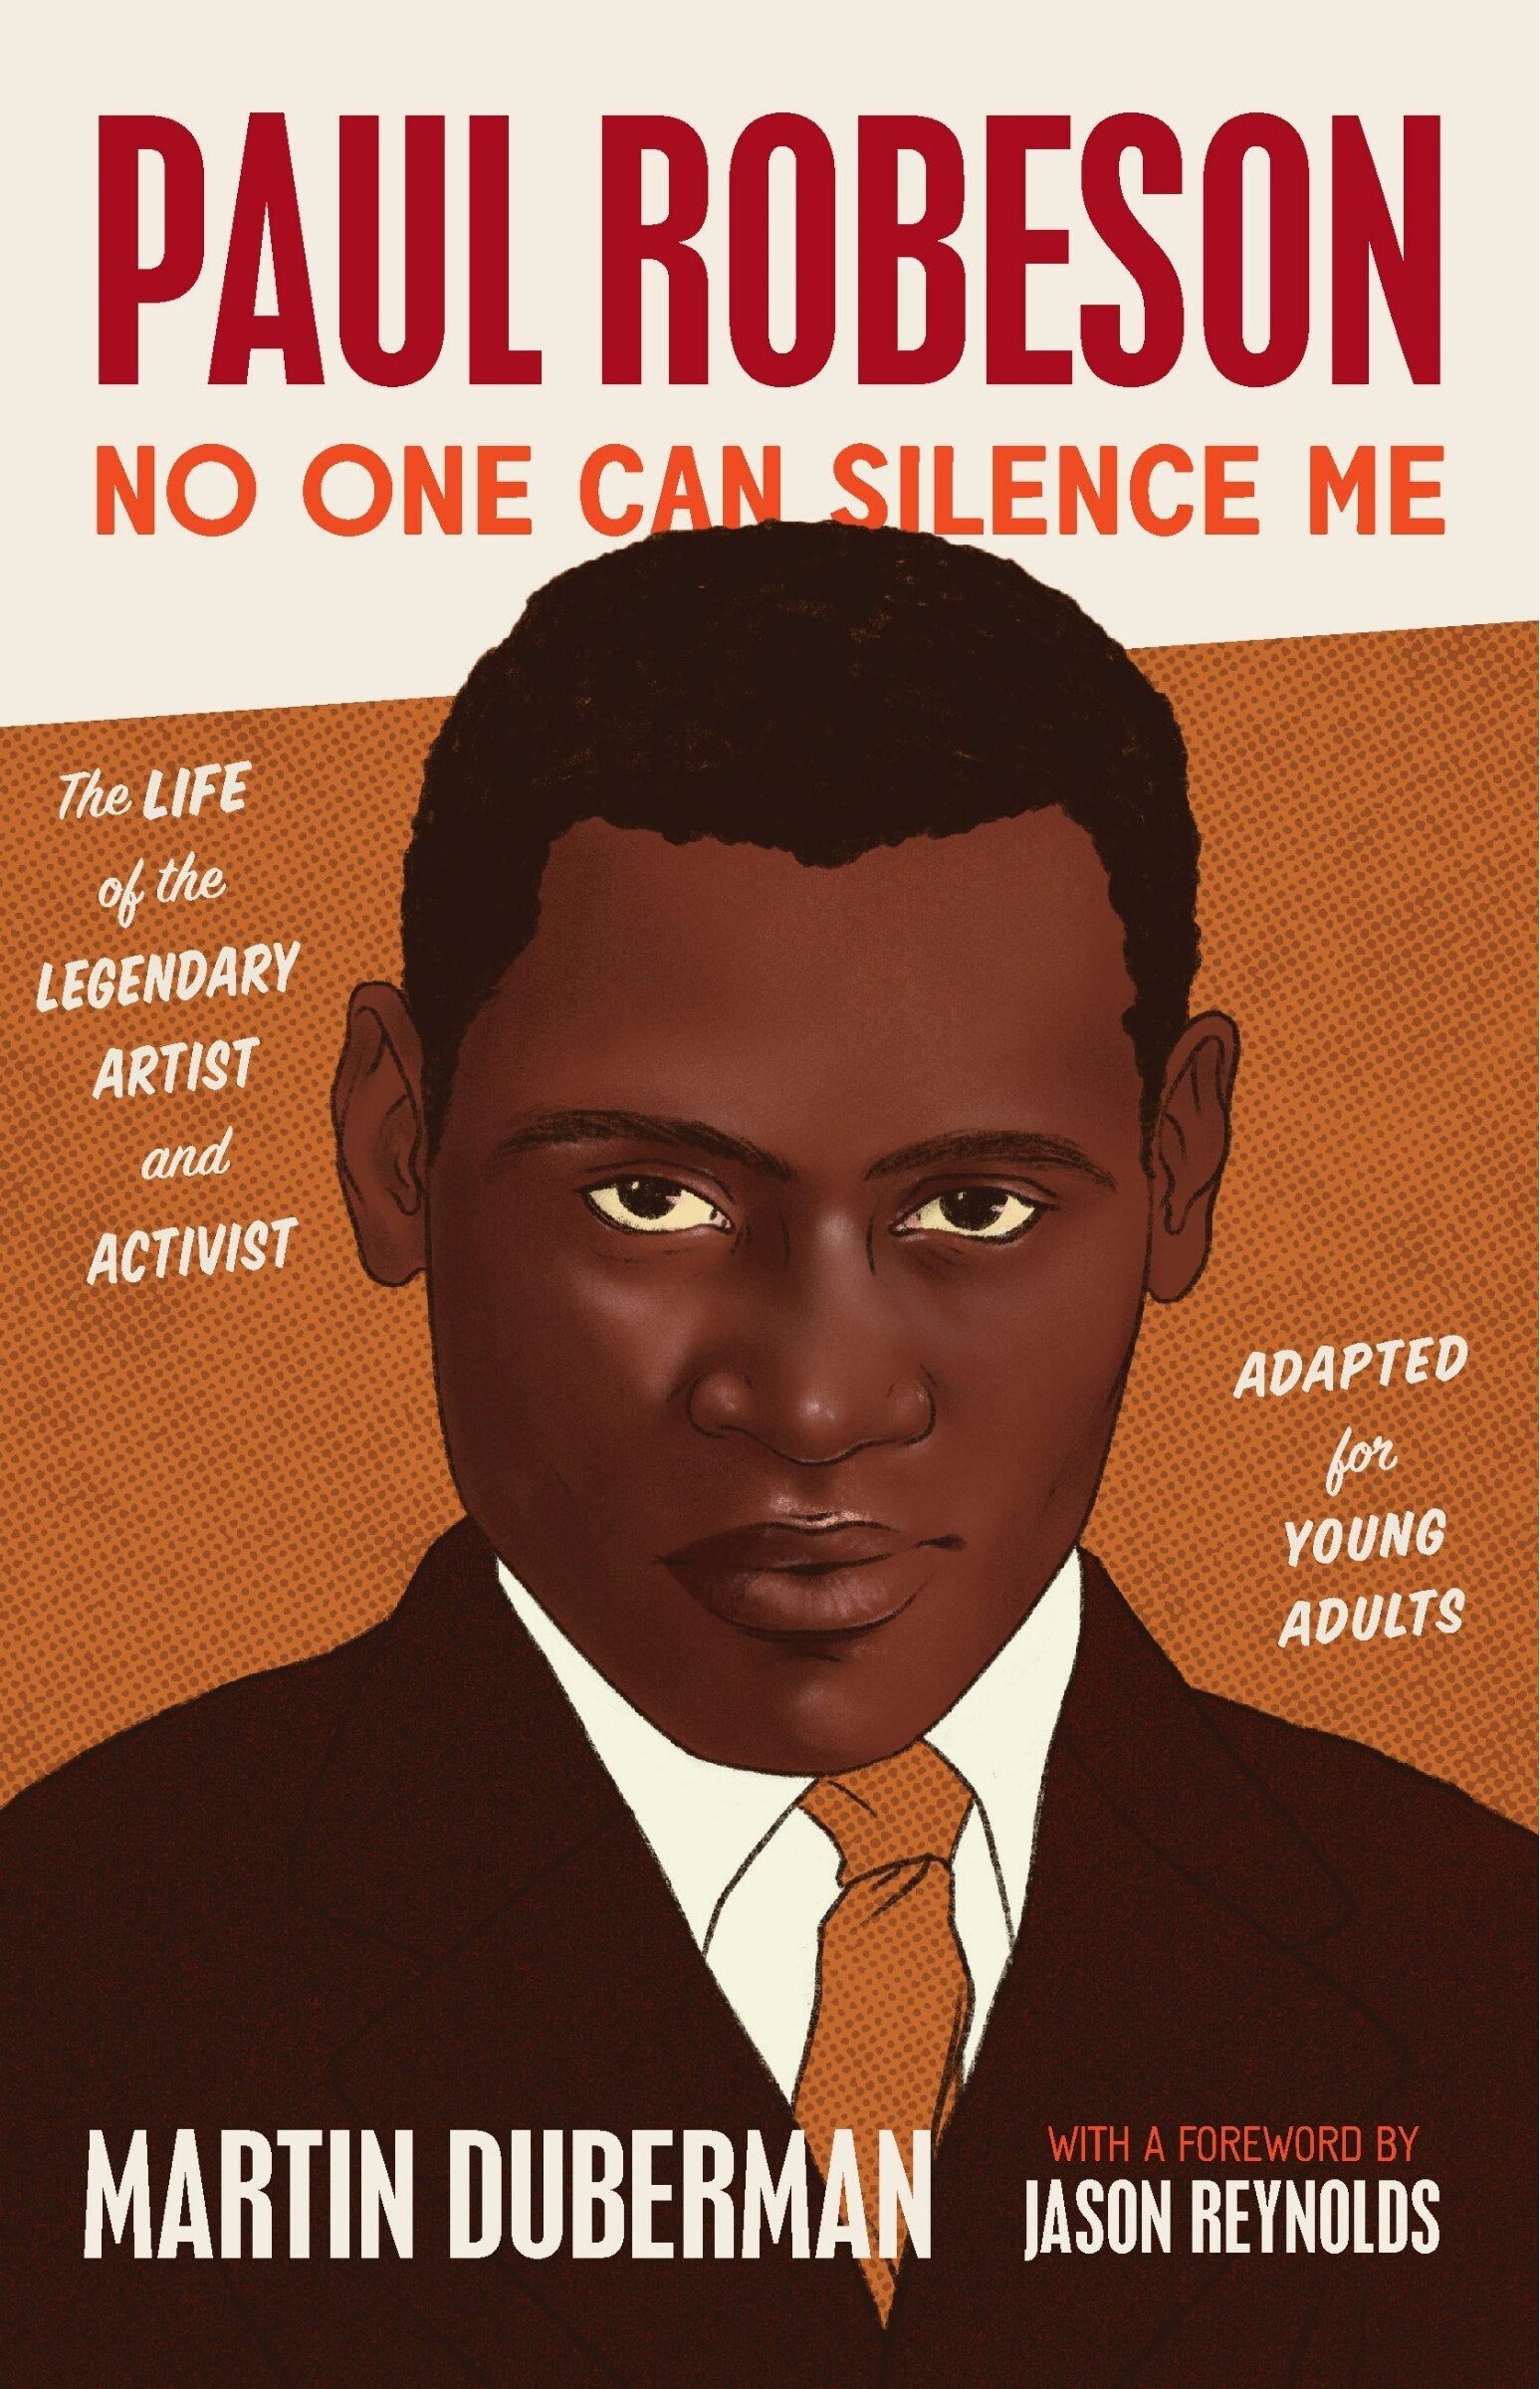 Paul Robeson: No One Can Silence Me: The Life of the Legendary Artist and Activist (Adapted for Young Adults) - Duberman, Martin (Hardcover)-Young Adult Biography-9781620976494-BookBizCanada